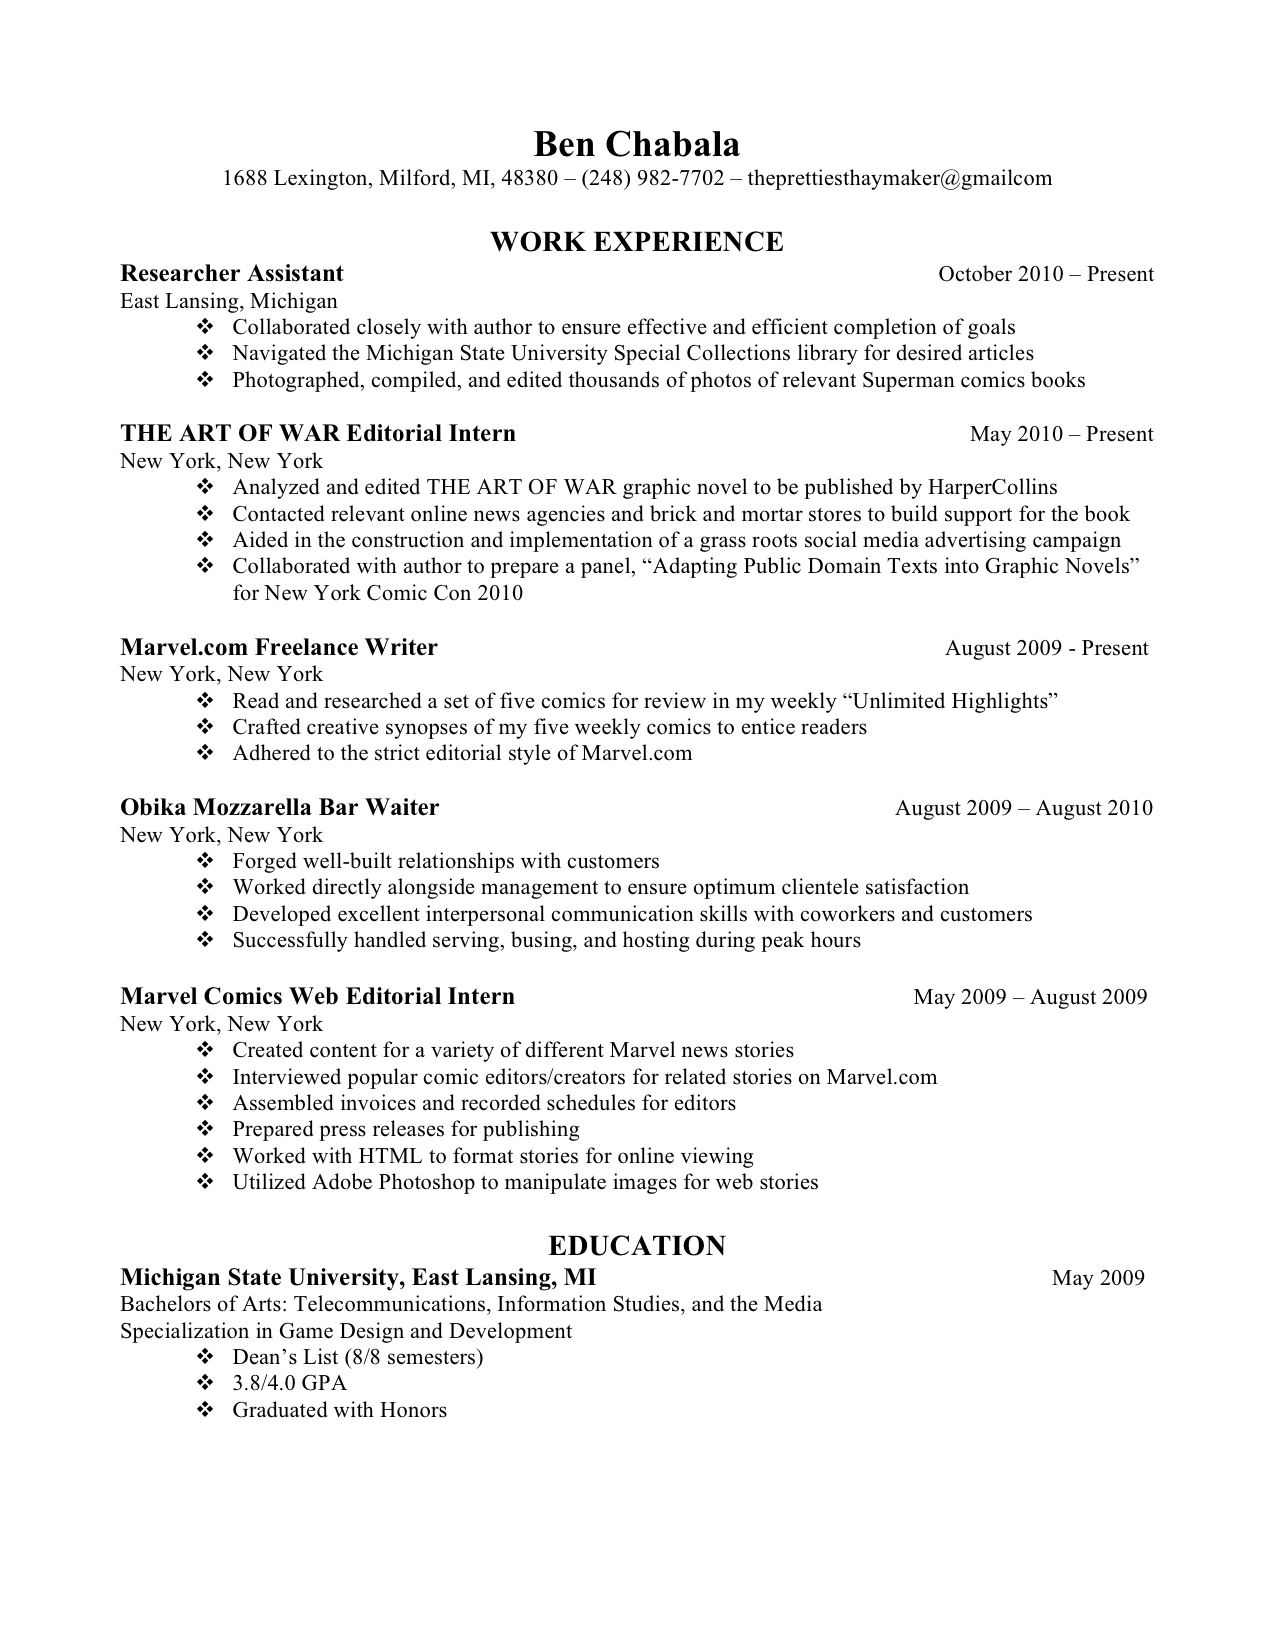 Resume for Graduate School Application [Template & Examples]